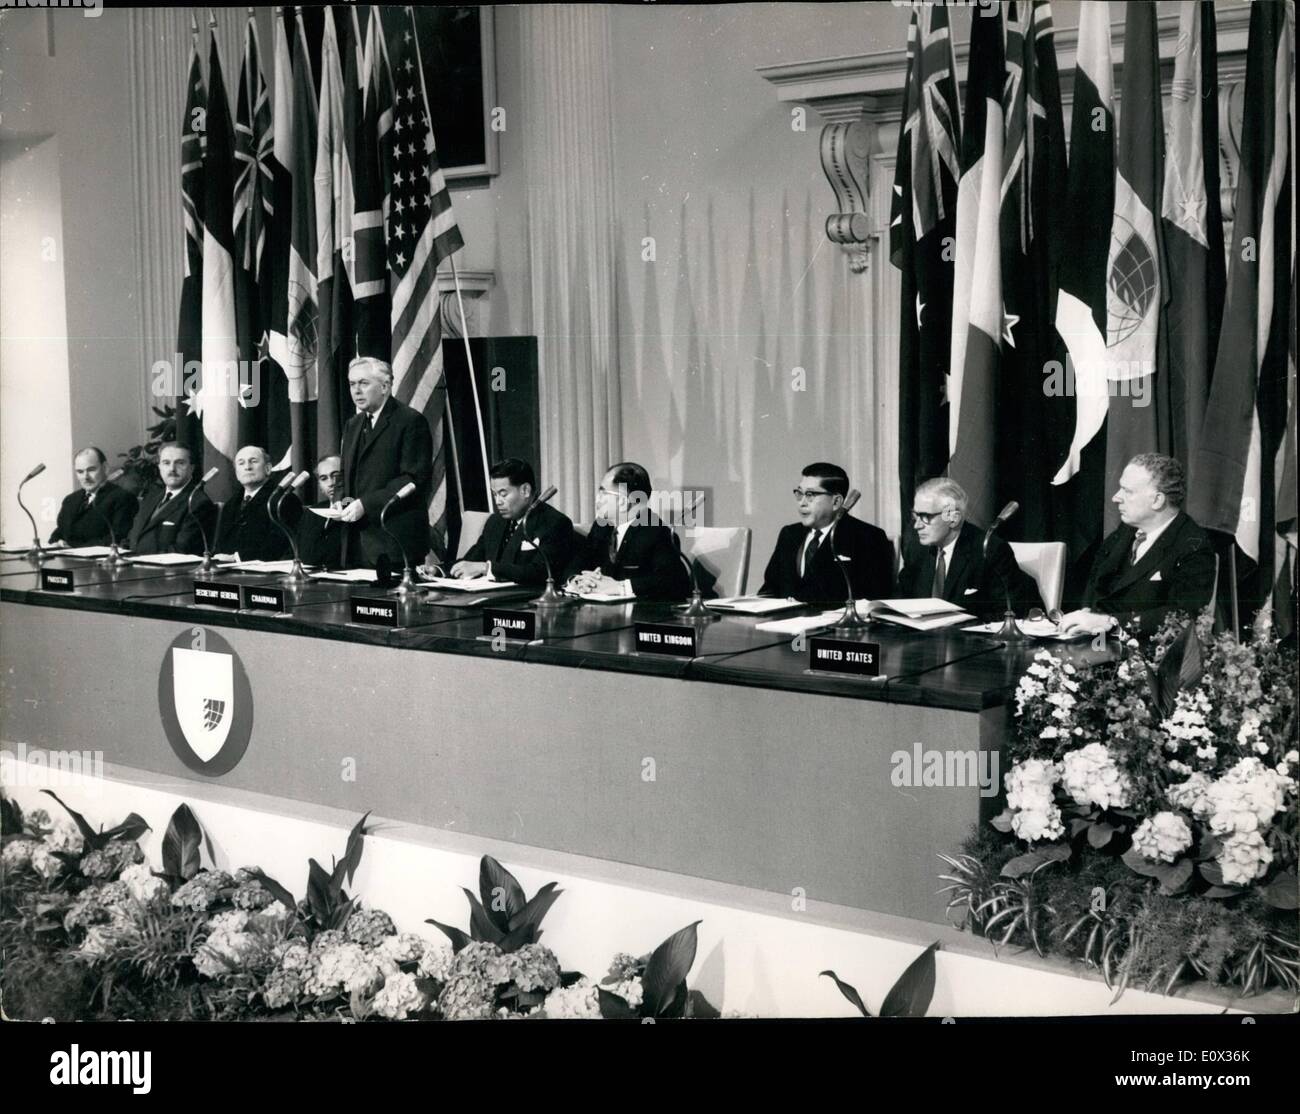 Mar. 03, 1965 - OPENING OF SEATO COUNCIL OF MINISTER,. The tenth meeting of the South-Nest Asia Treaty Organisation Council of Ministers, opened this morning at the Banqueting Hall, Whitehall. PHOTO SHOWS:- General view showing MR. HAROLD WILSON, the Prime Mnister, addressing the meeting at the opening ceremonies. ( L to R): PAUL HASLUCK, Minister of External Affairs, of Australis; M. ACHILLE CLARAC, of France, who is attending only as an observer; MR. D.J. EYRE, New Zealand's Minister of Defence; MR, ZULFIKAR ALI BHUTTO , Pakistan Foreign Minister; MR. WILSON; MR Stock Photo